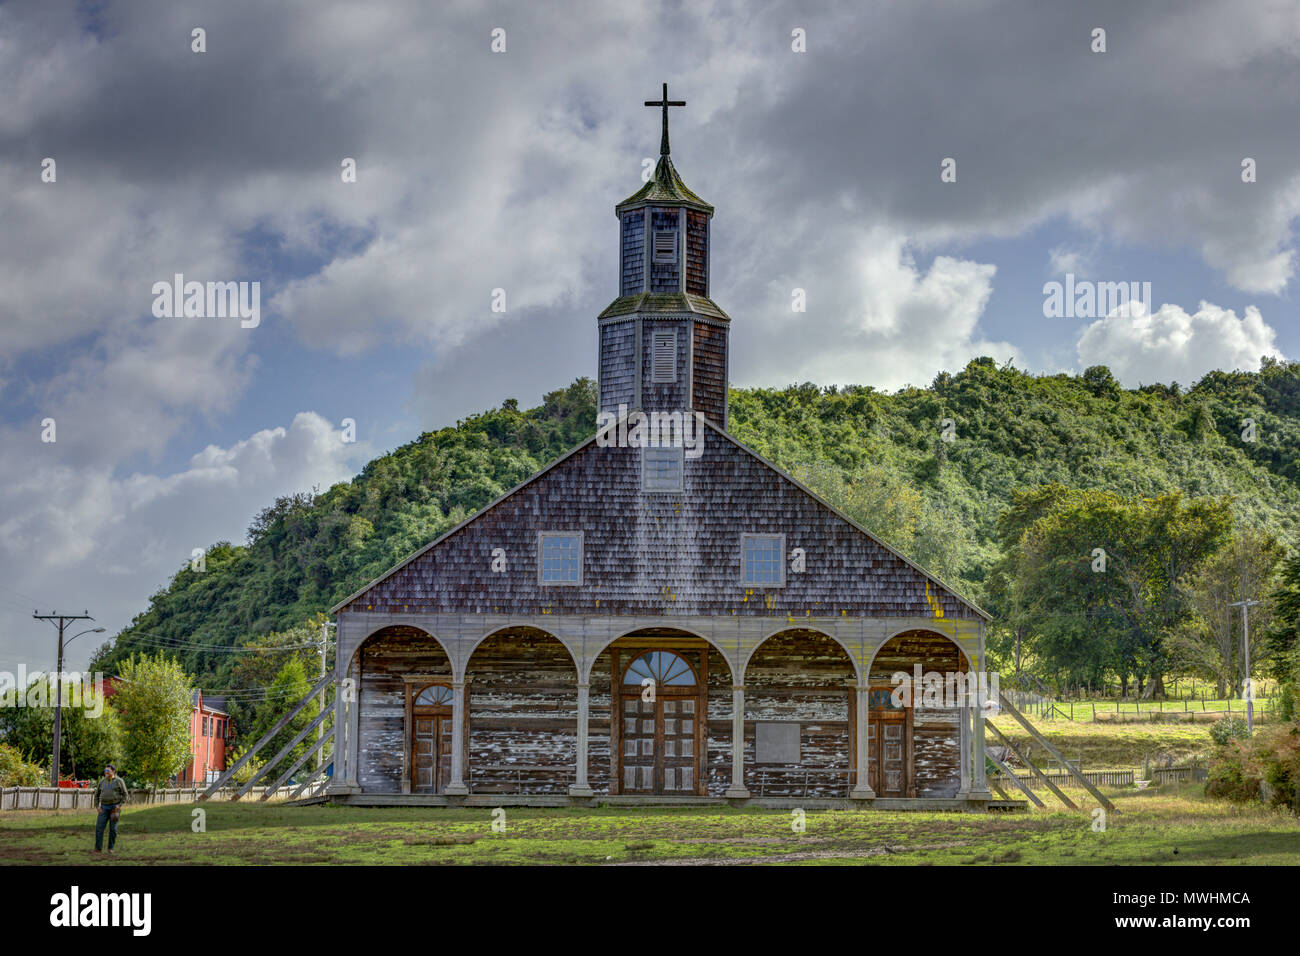 Quinchao Island, Chiloé, Chile: The Unesco World Heritage church in Quinchao is the largest one on Chiloé. Stock Photo